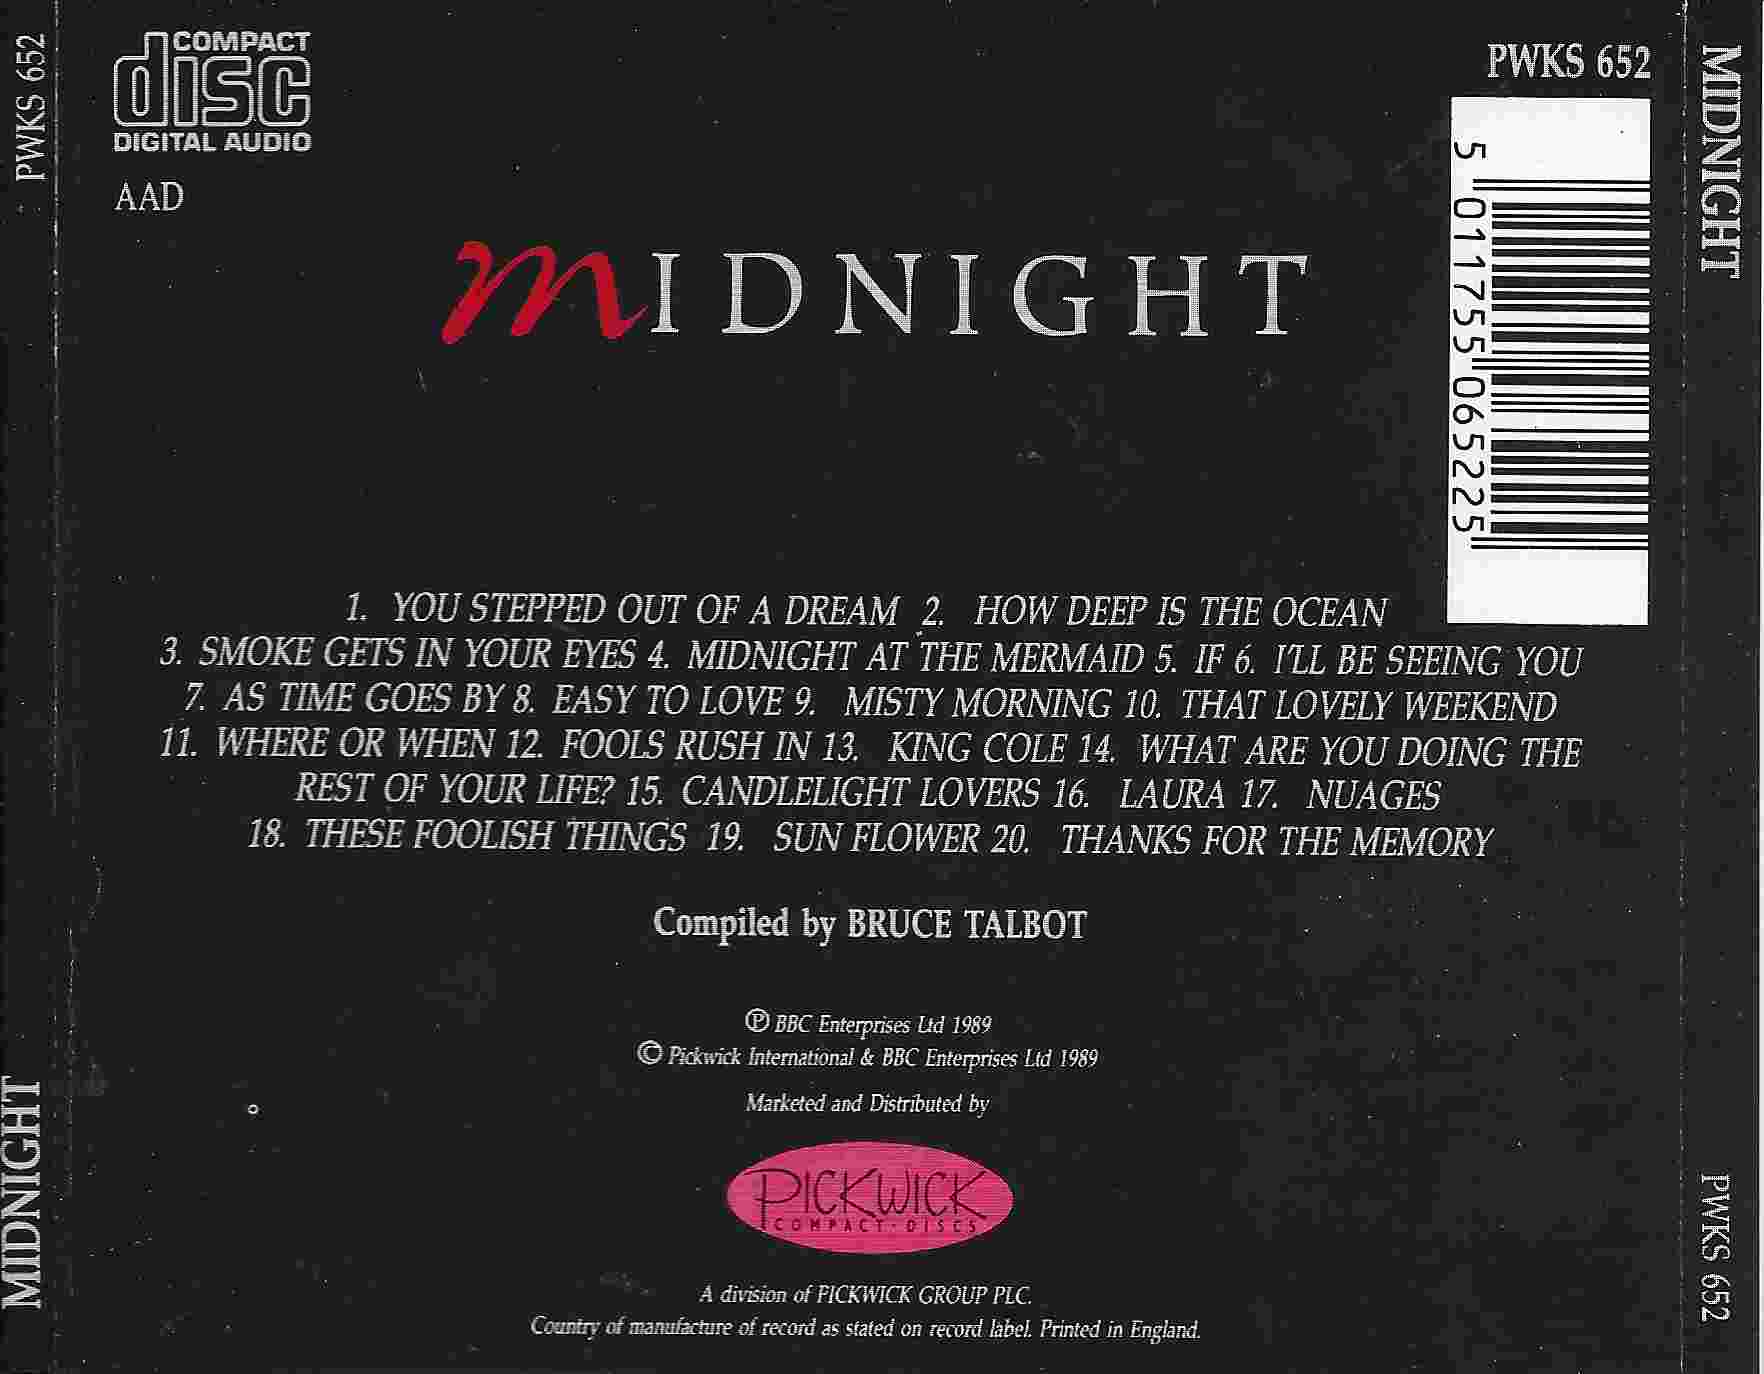 Picture of PWKS 652 Midnight by artist Ken Moule from the BBC records and Tapes library